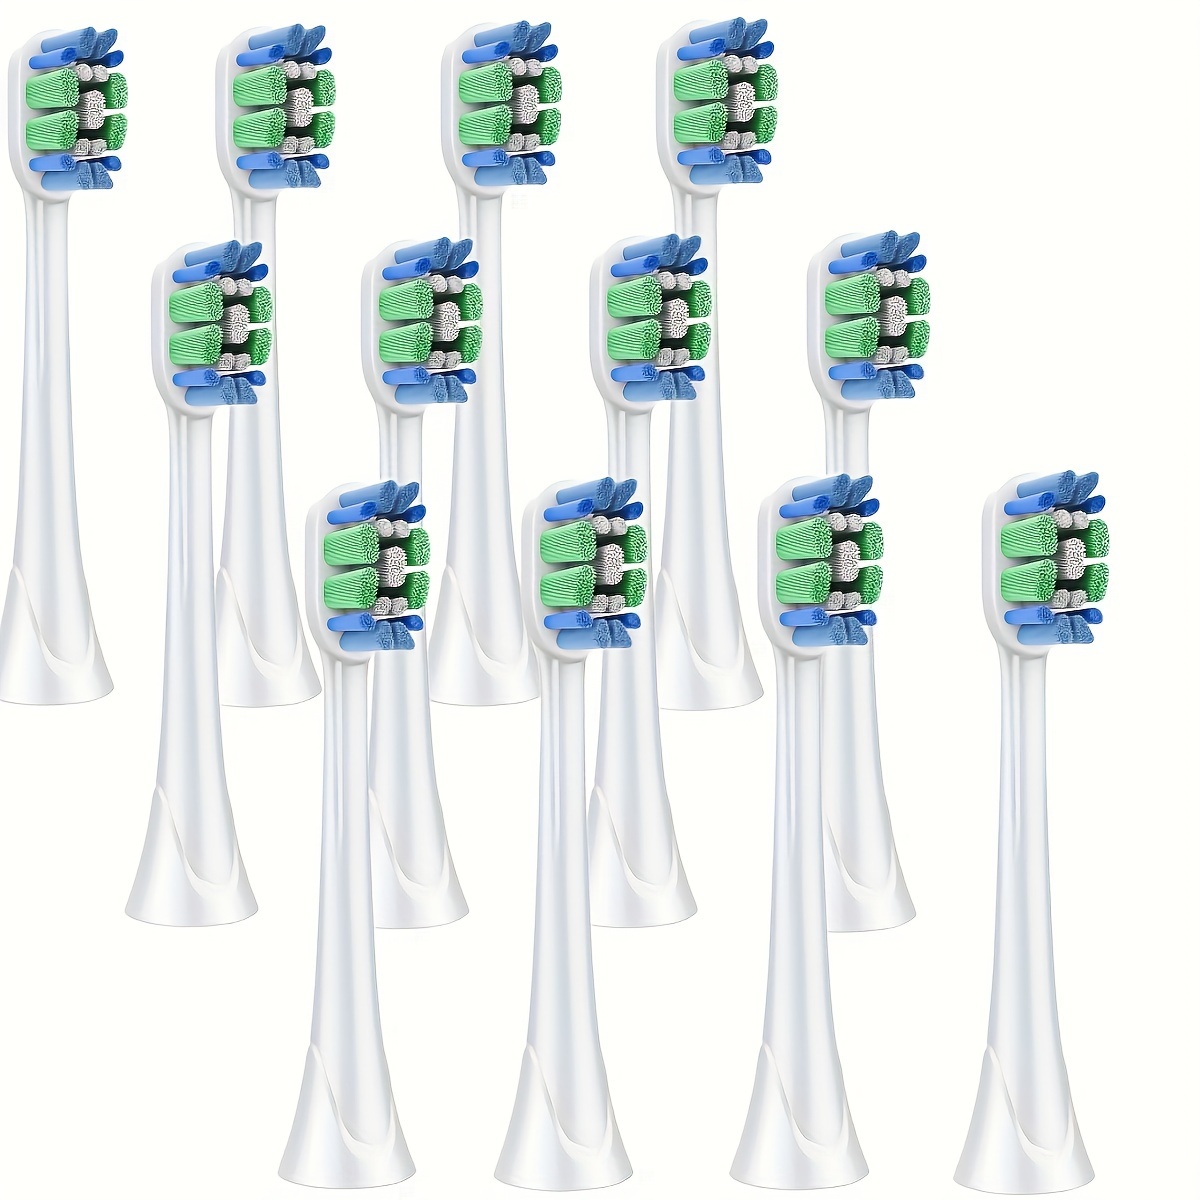 

4pcs/12pcs Toothbrush Heads For Philips For Sonicare, Replacement Brush Heads Protective Cover Soft Dupont Bristles Electric Toothbrush Replacement Heads For Oral Health For Philips